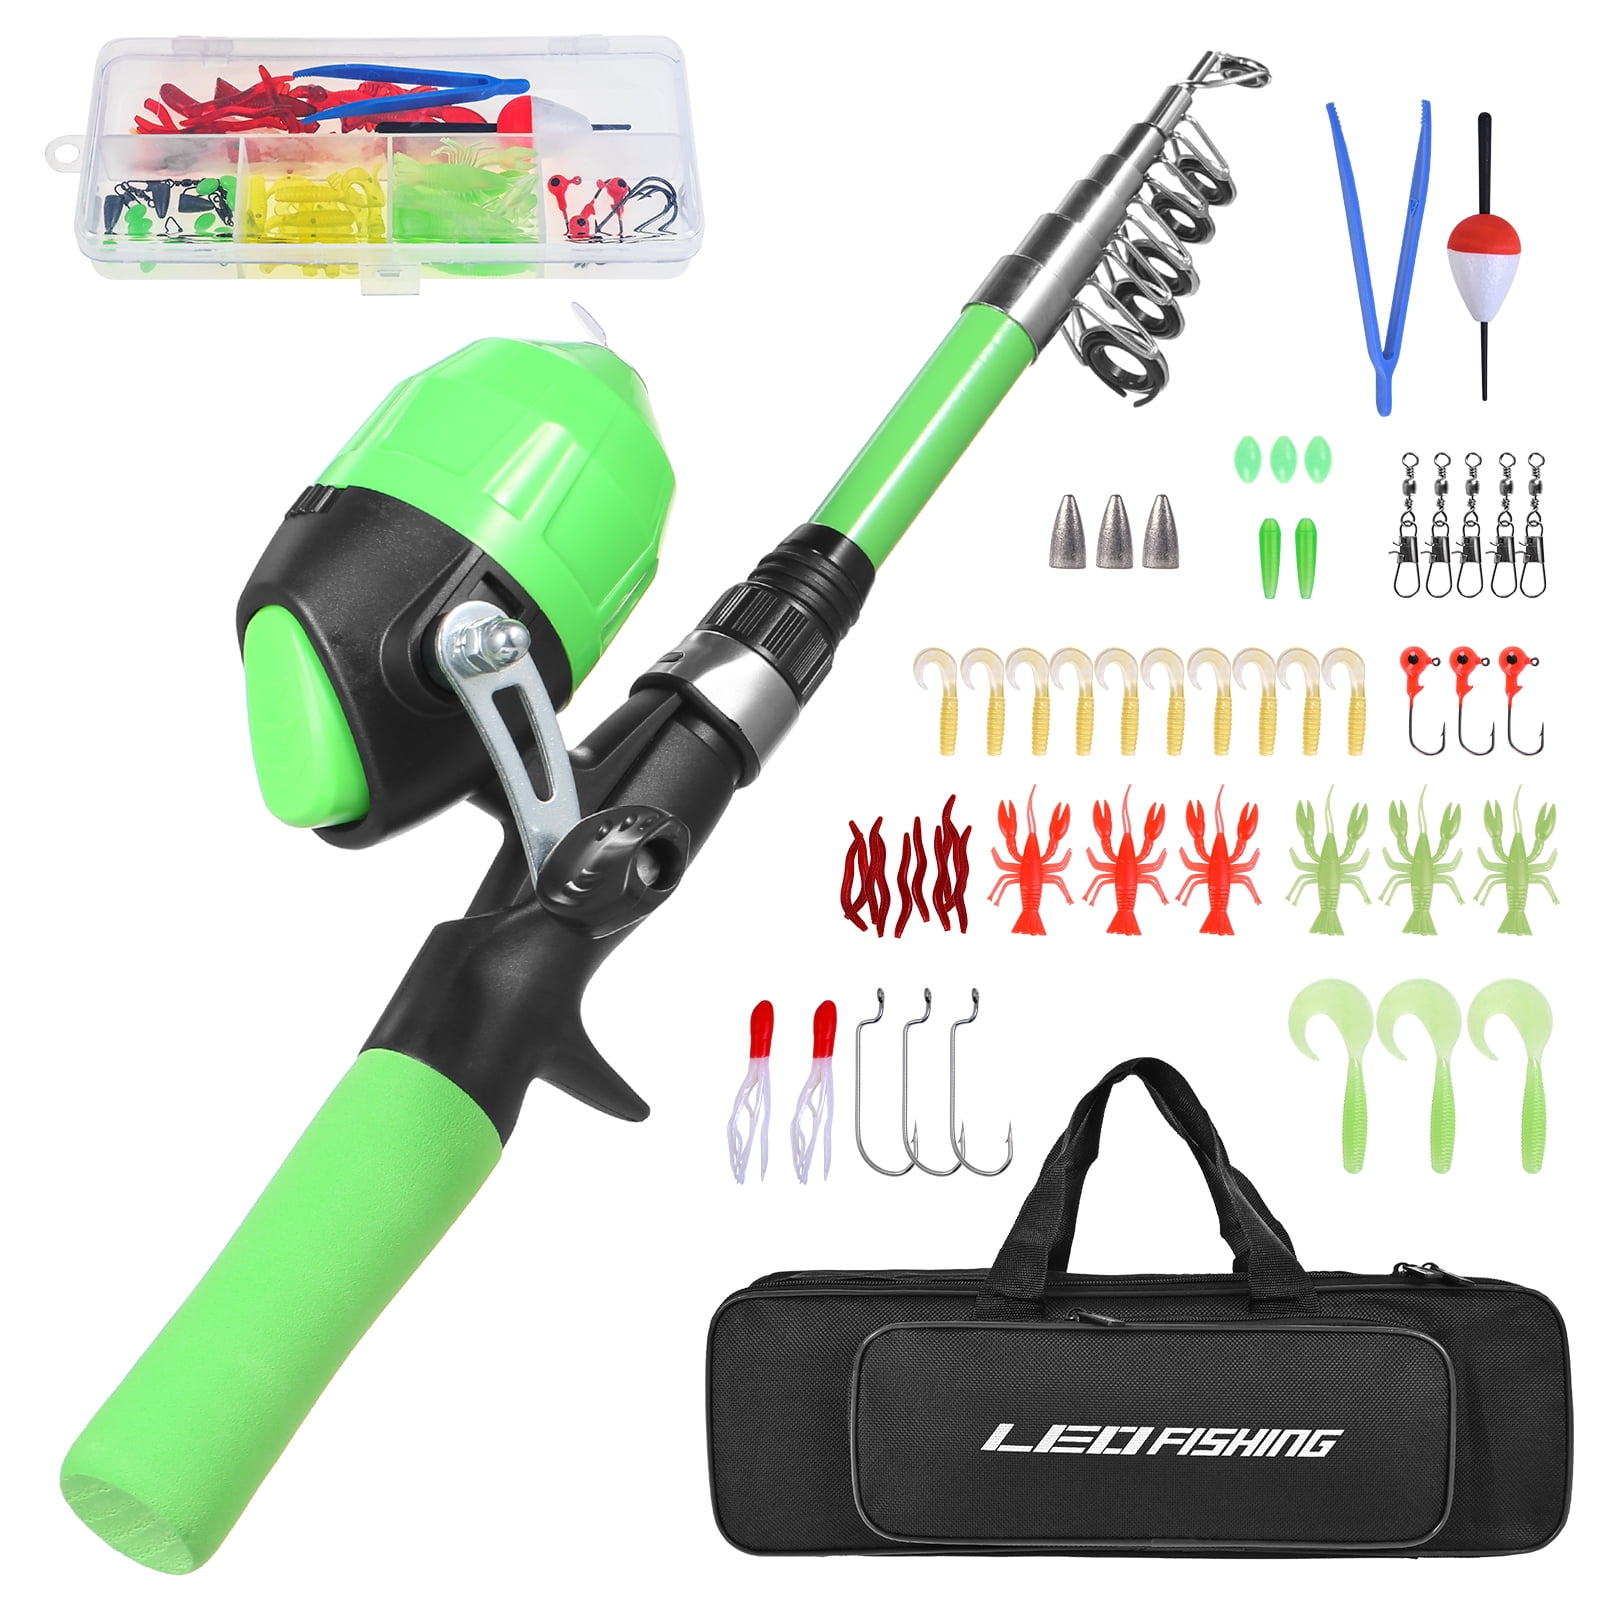 Annleor Kids Fishing Pole - Telescopic Fishing Rod and Reel Combo Kit -  Fishing Gear, Fishing Lures, Carry On Bag, Fully Fishing Equipment - for  Boys, Girls, Youth (Black, 4.92), Spinning Combos -  Canada